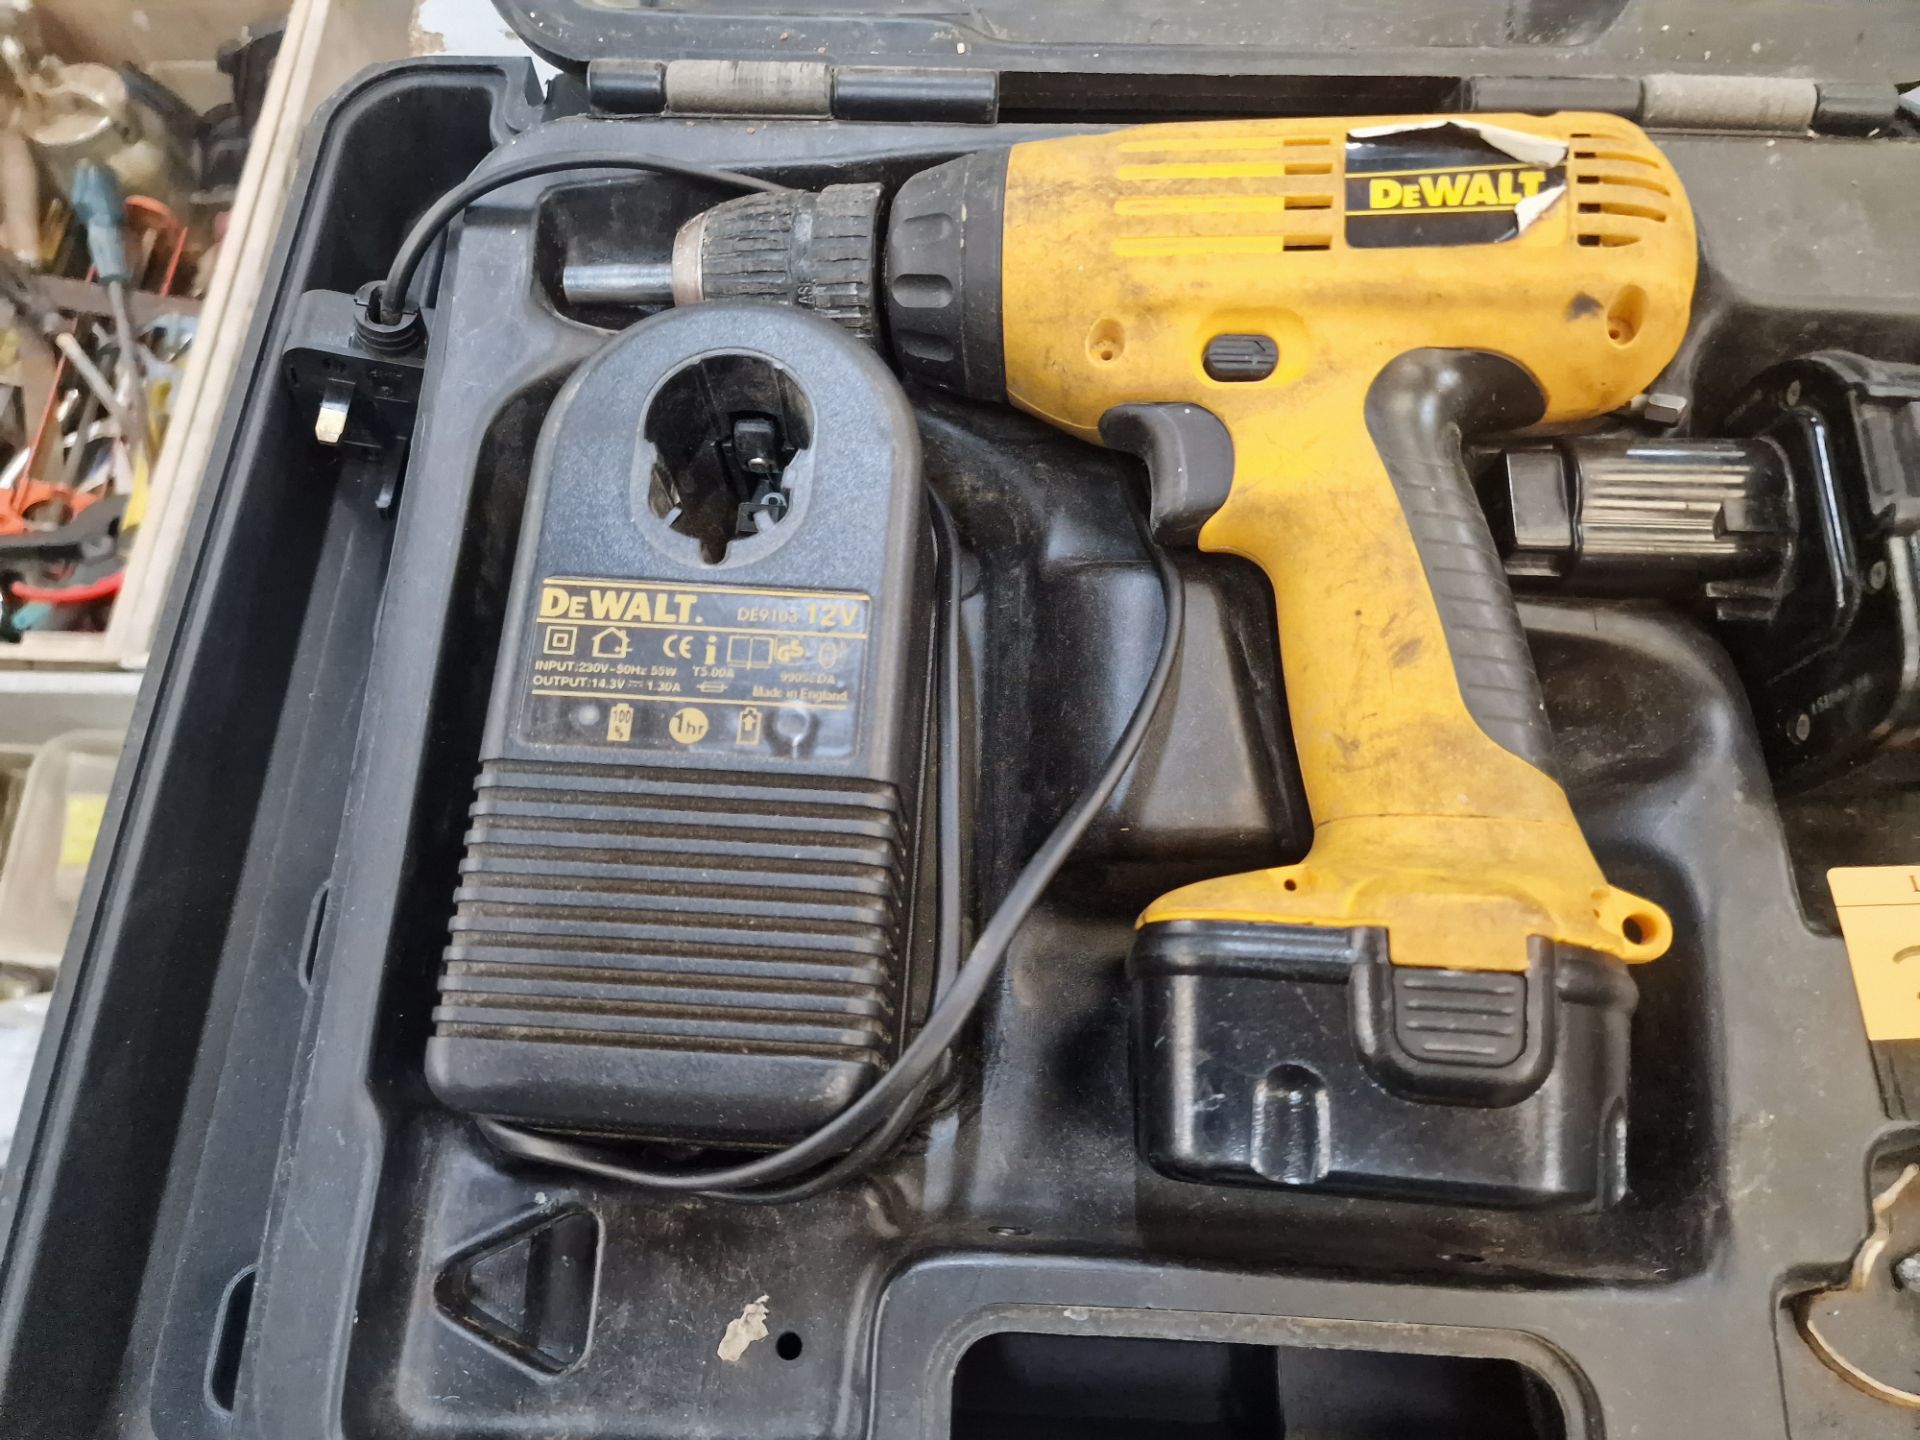 Dewalt cordless drill including 2 off batteries, 1 charger and 1 case - Image 2 of 4